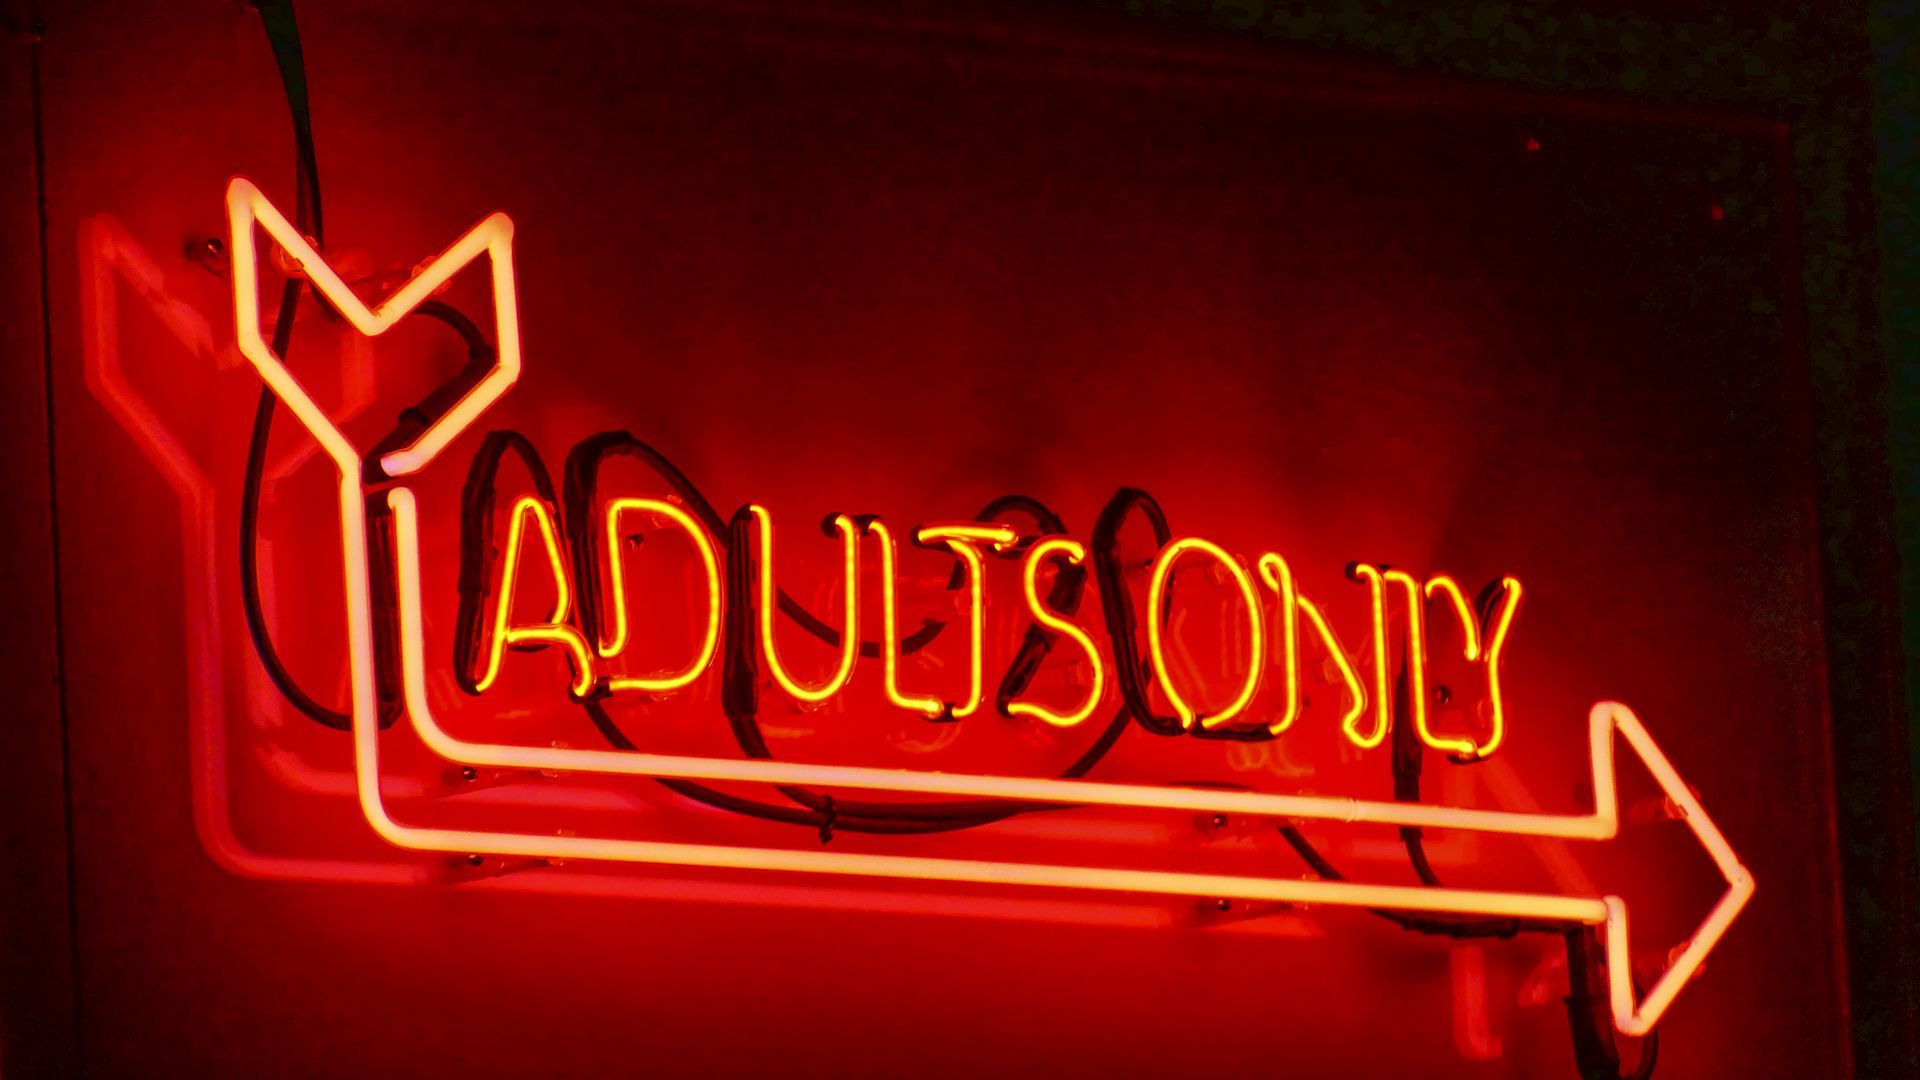 A neon sign that says "Adults Only"